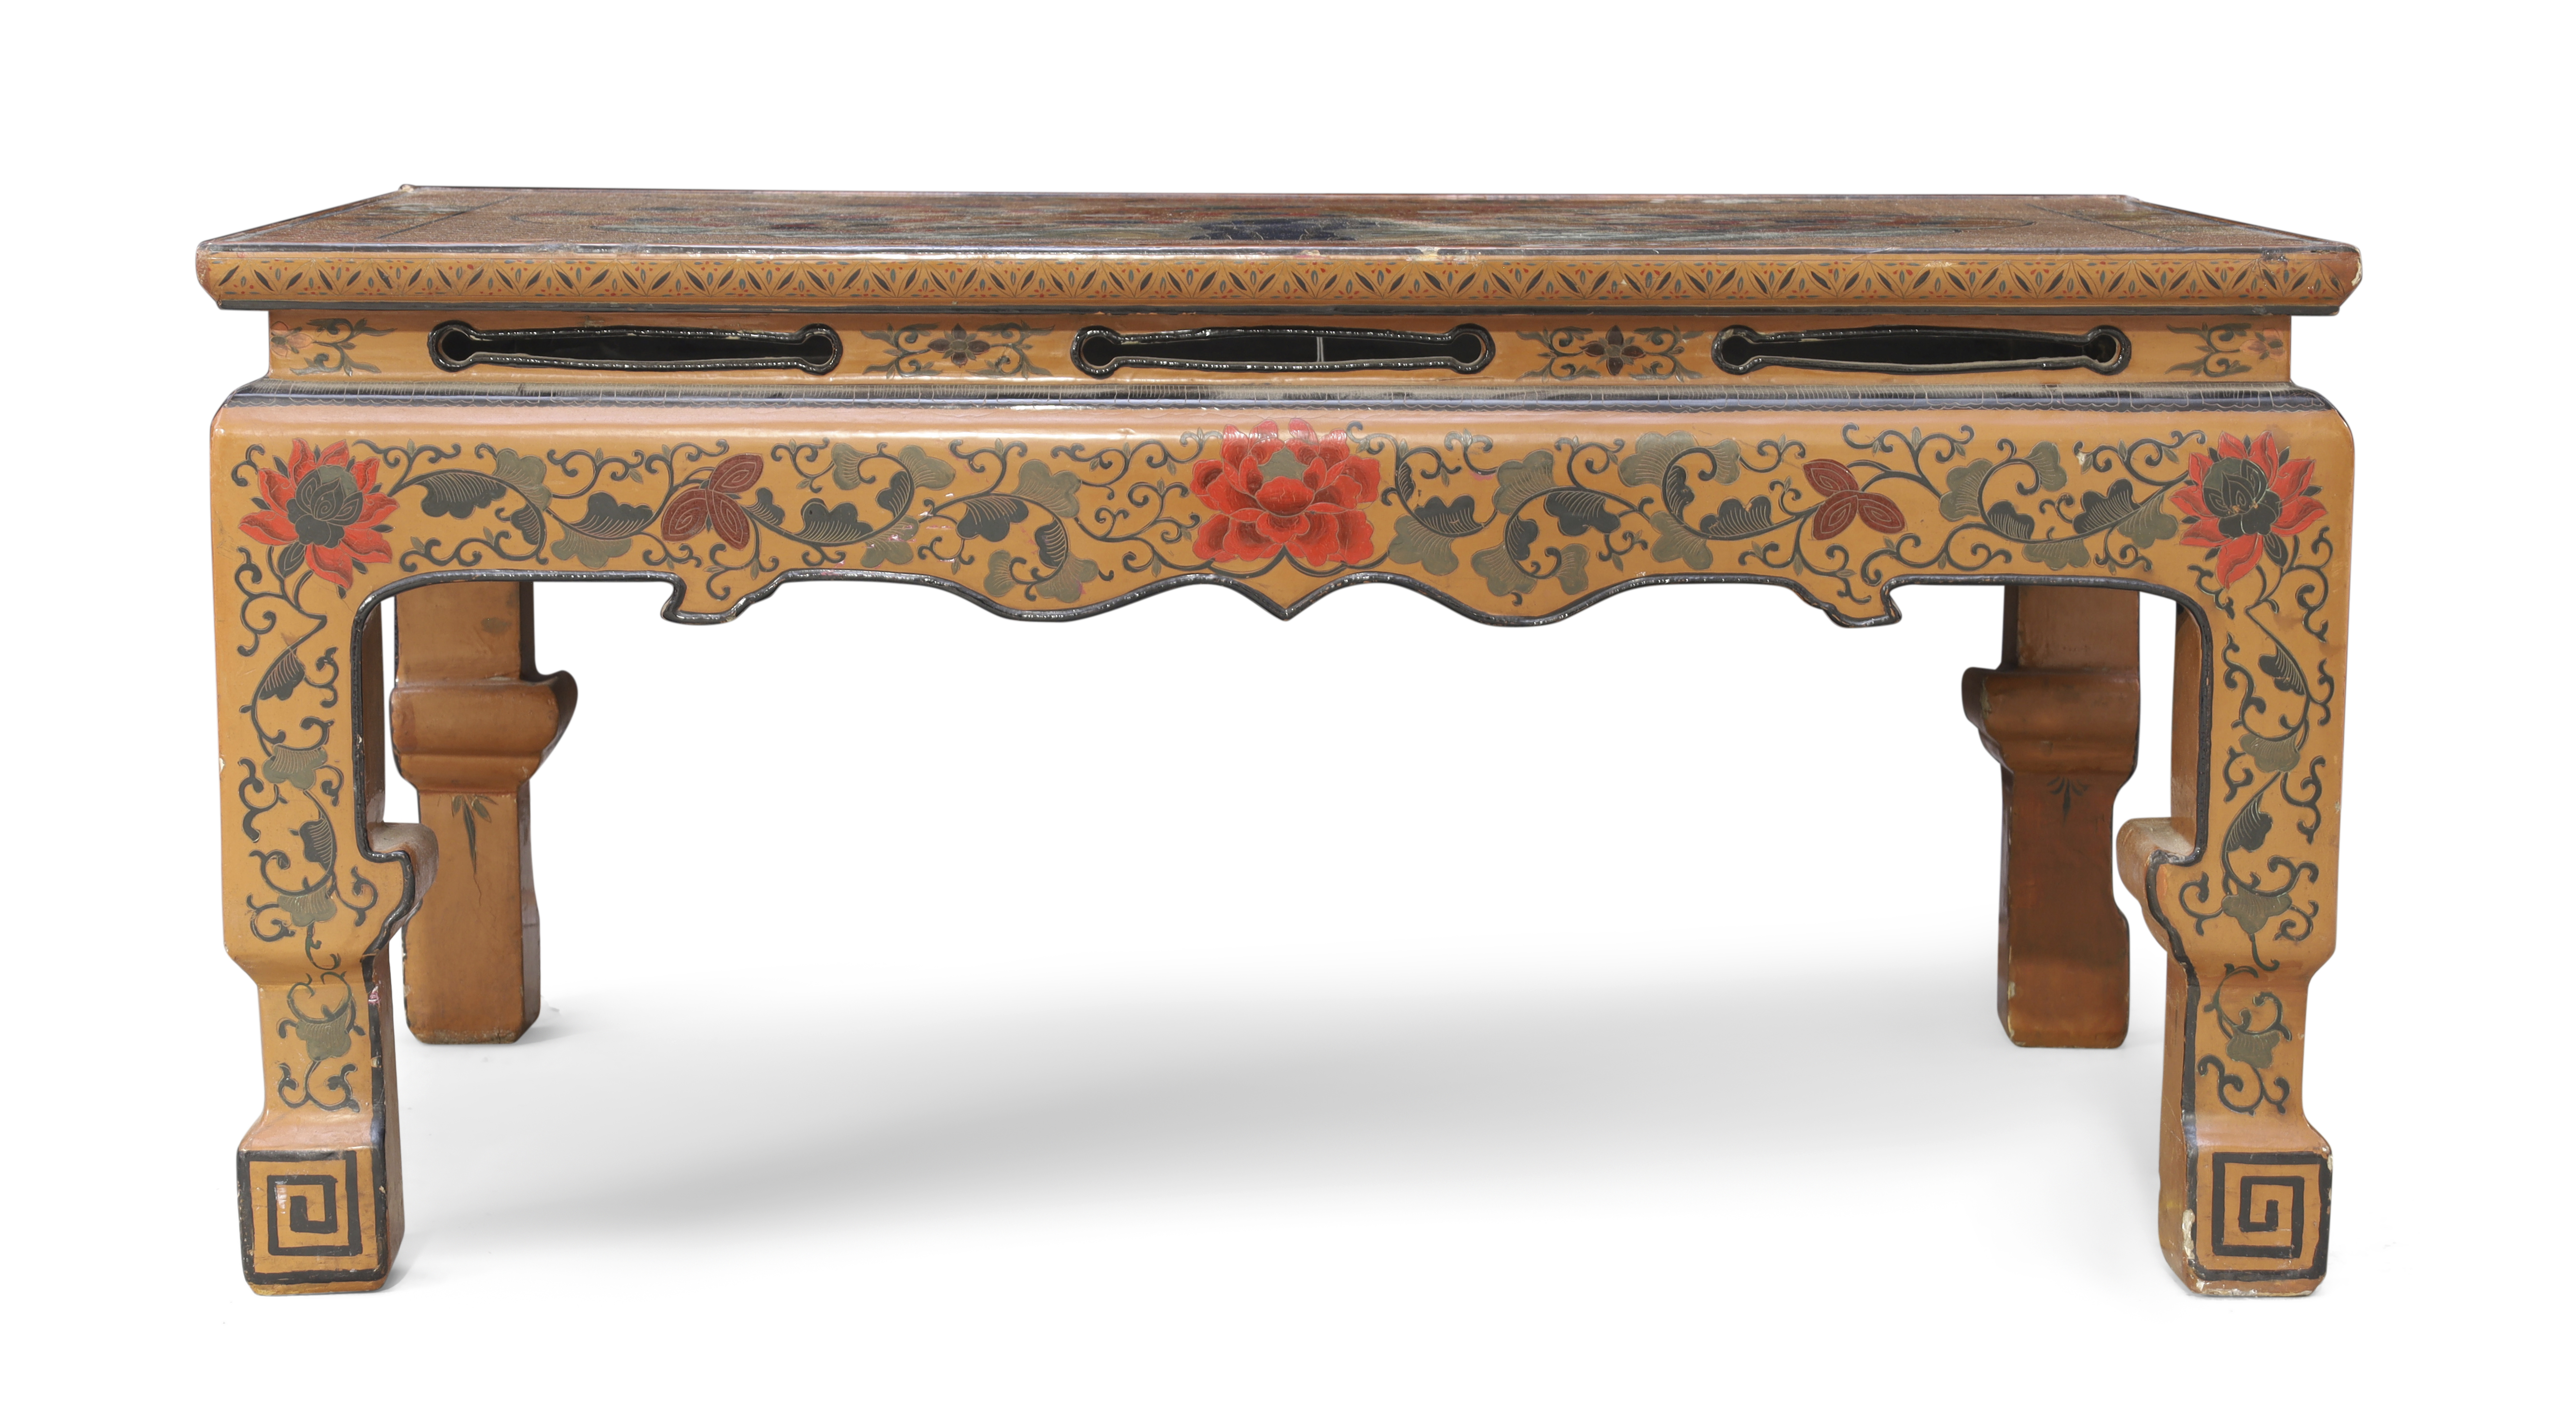 A Chinese tianqi lacquer table, Late Qing dynasty / Republic period, The top surface decorated wi...